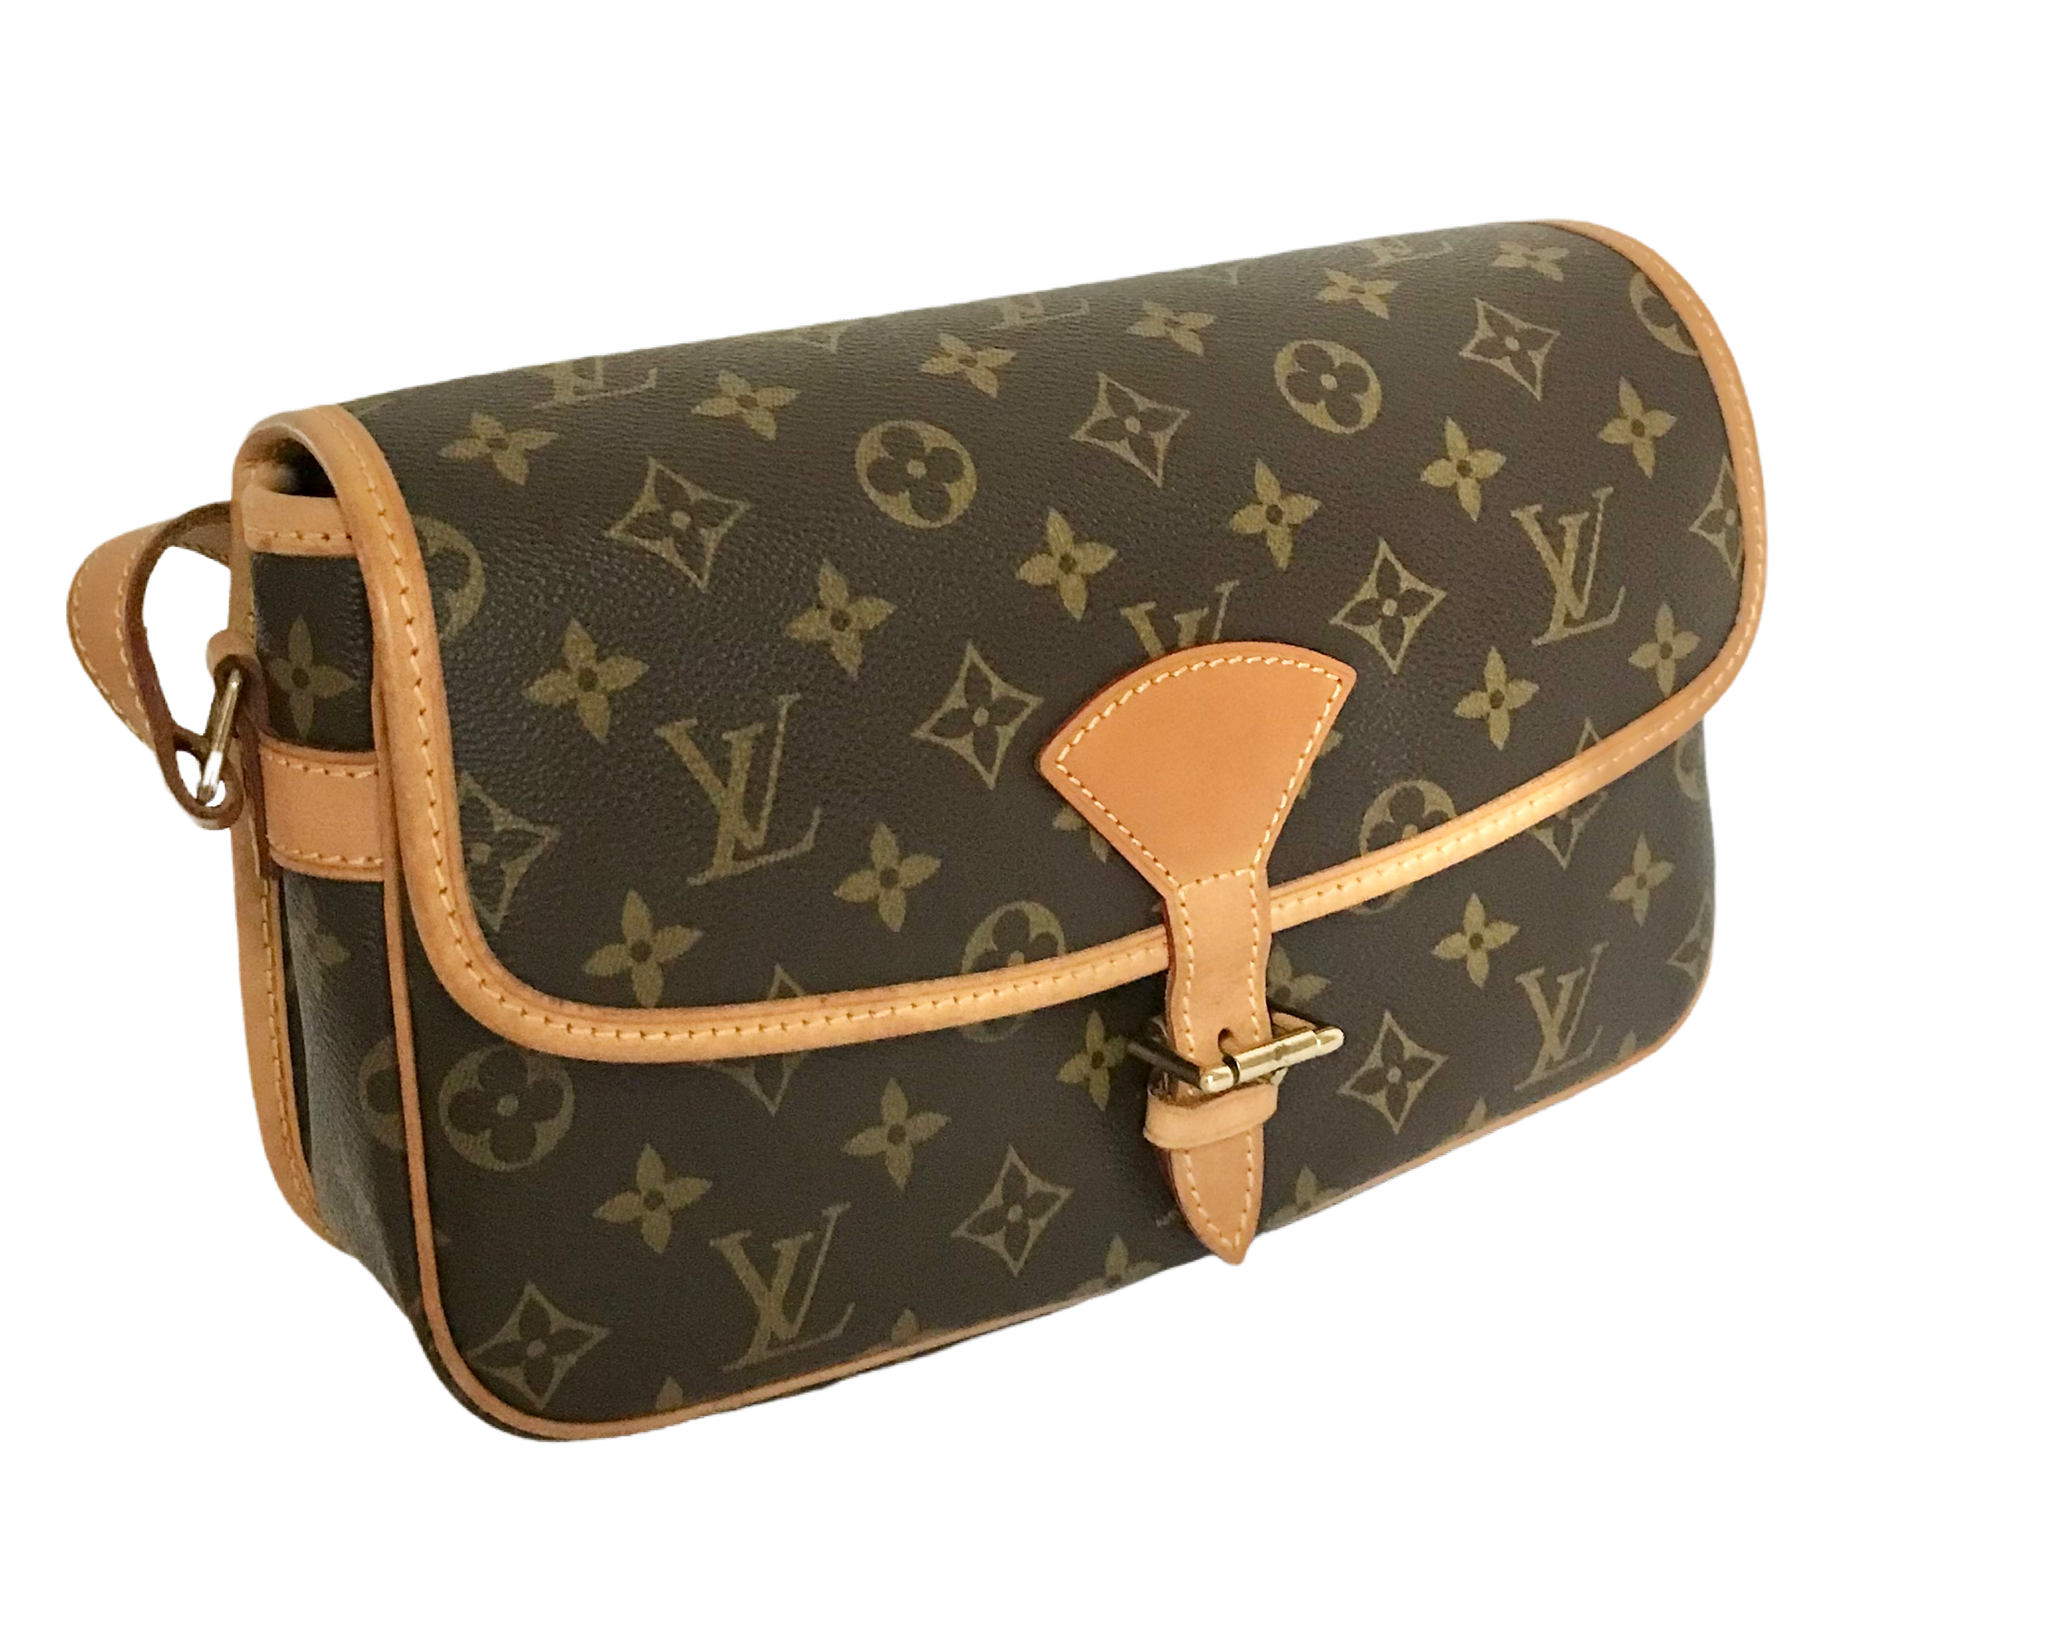 Louis Vuitton, Bags, Gently Used Authentic Louis Vuitton Bag